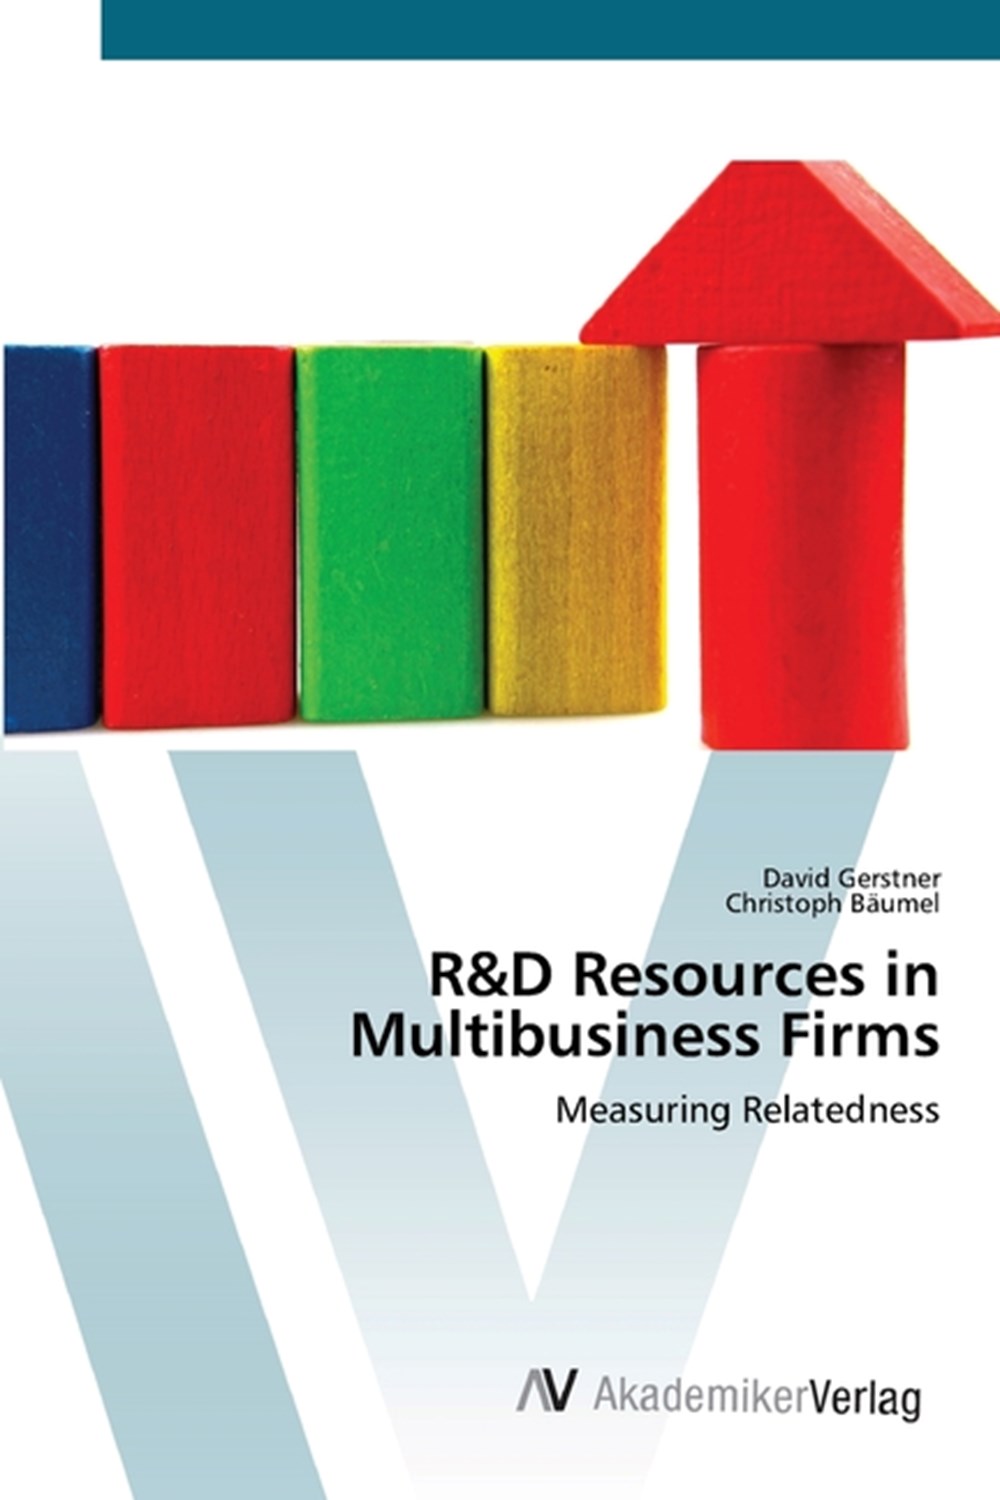 R&D Resources in Multibusiness Firms